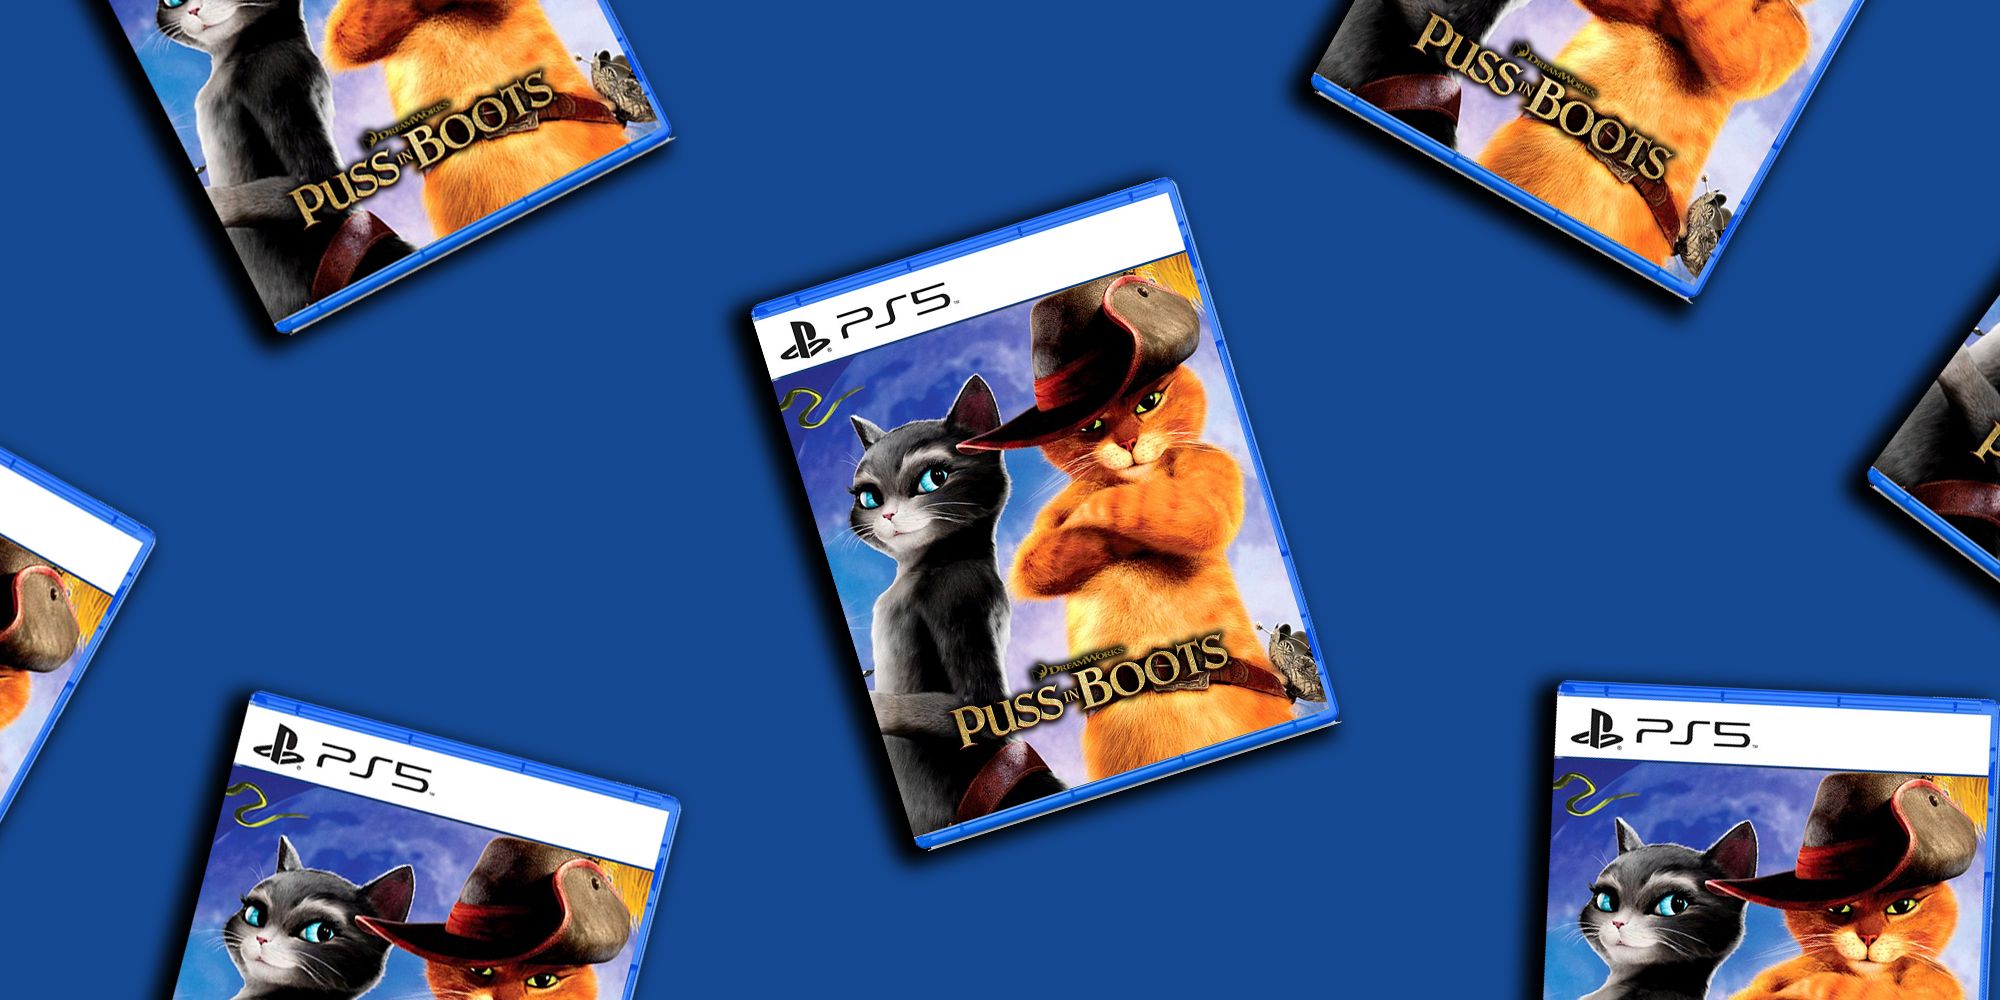 Puss in Boots video box art mocked up on PS5